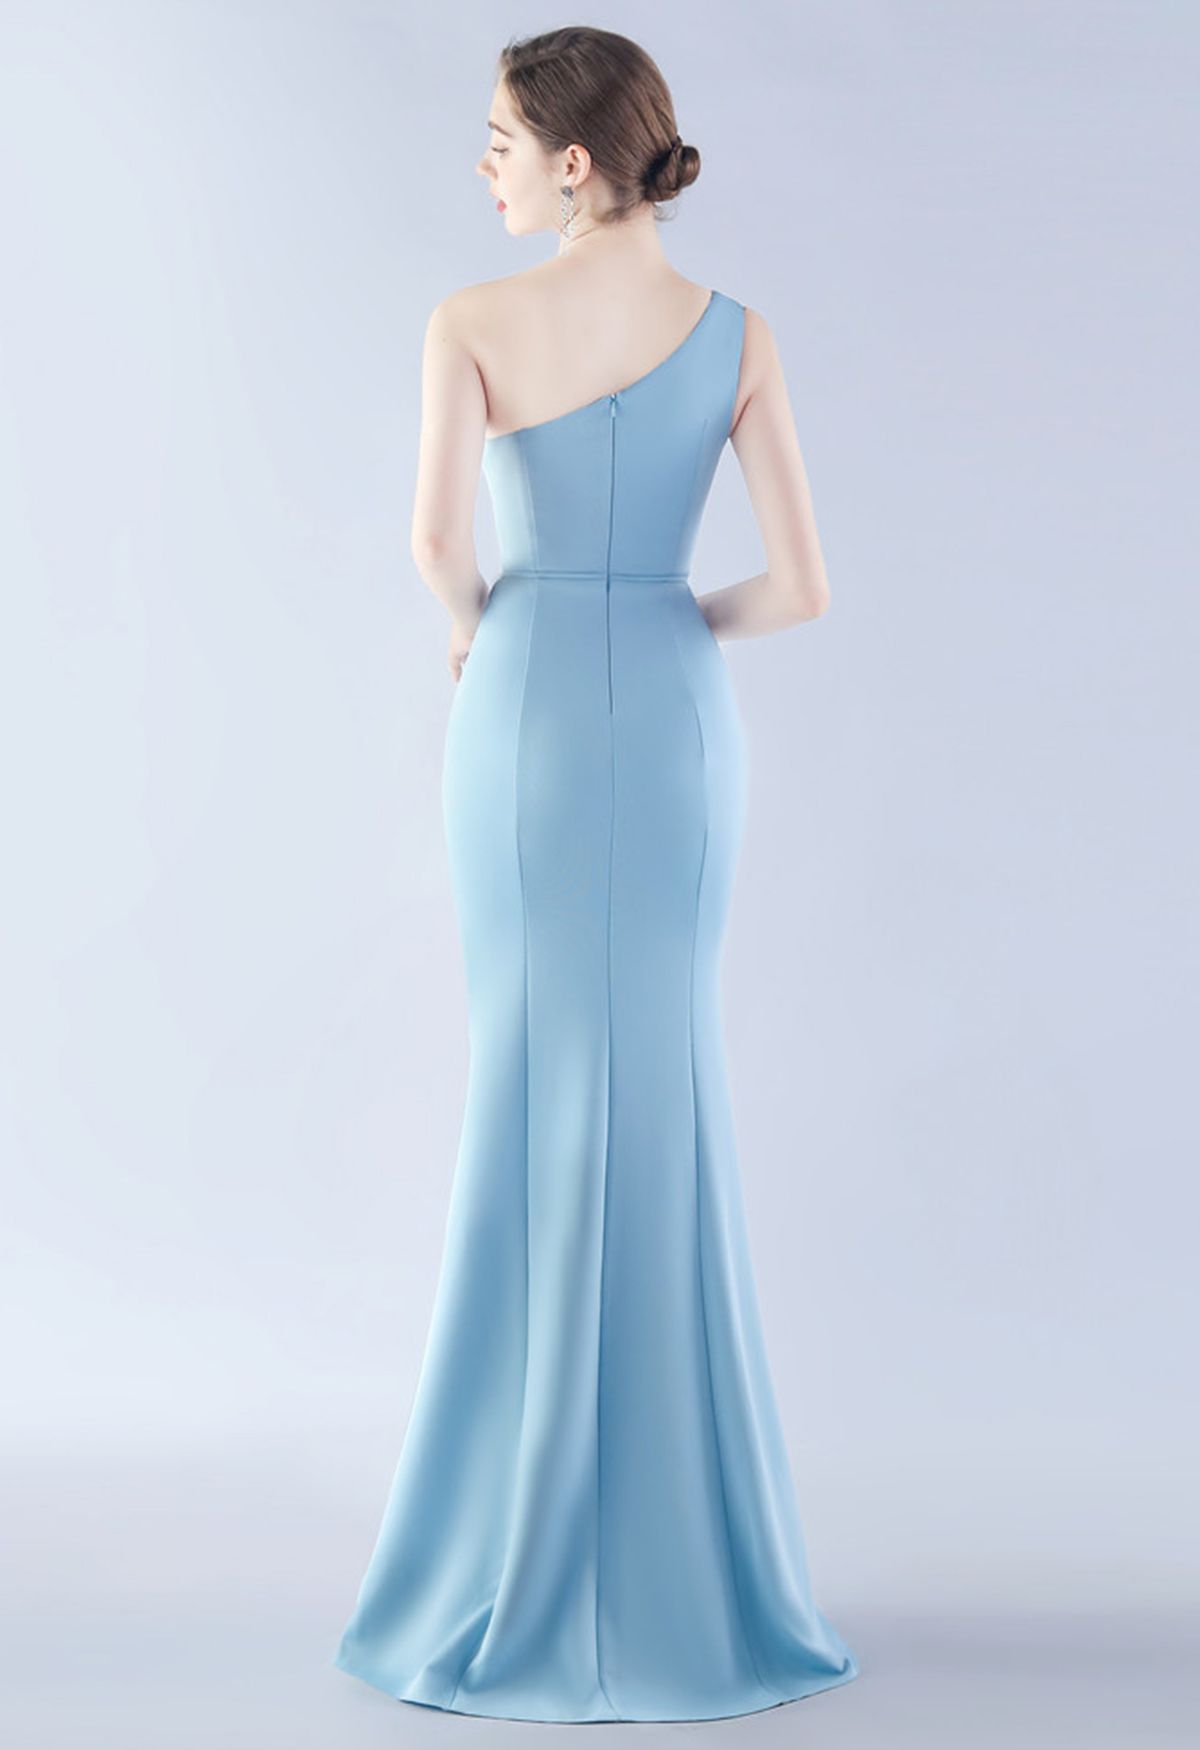 Satin Finished One-Shoulder Slit Mermaid Gown in Baby Blue